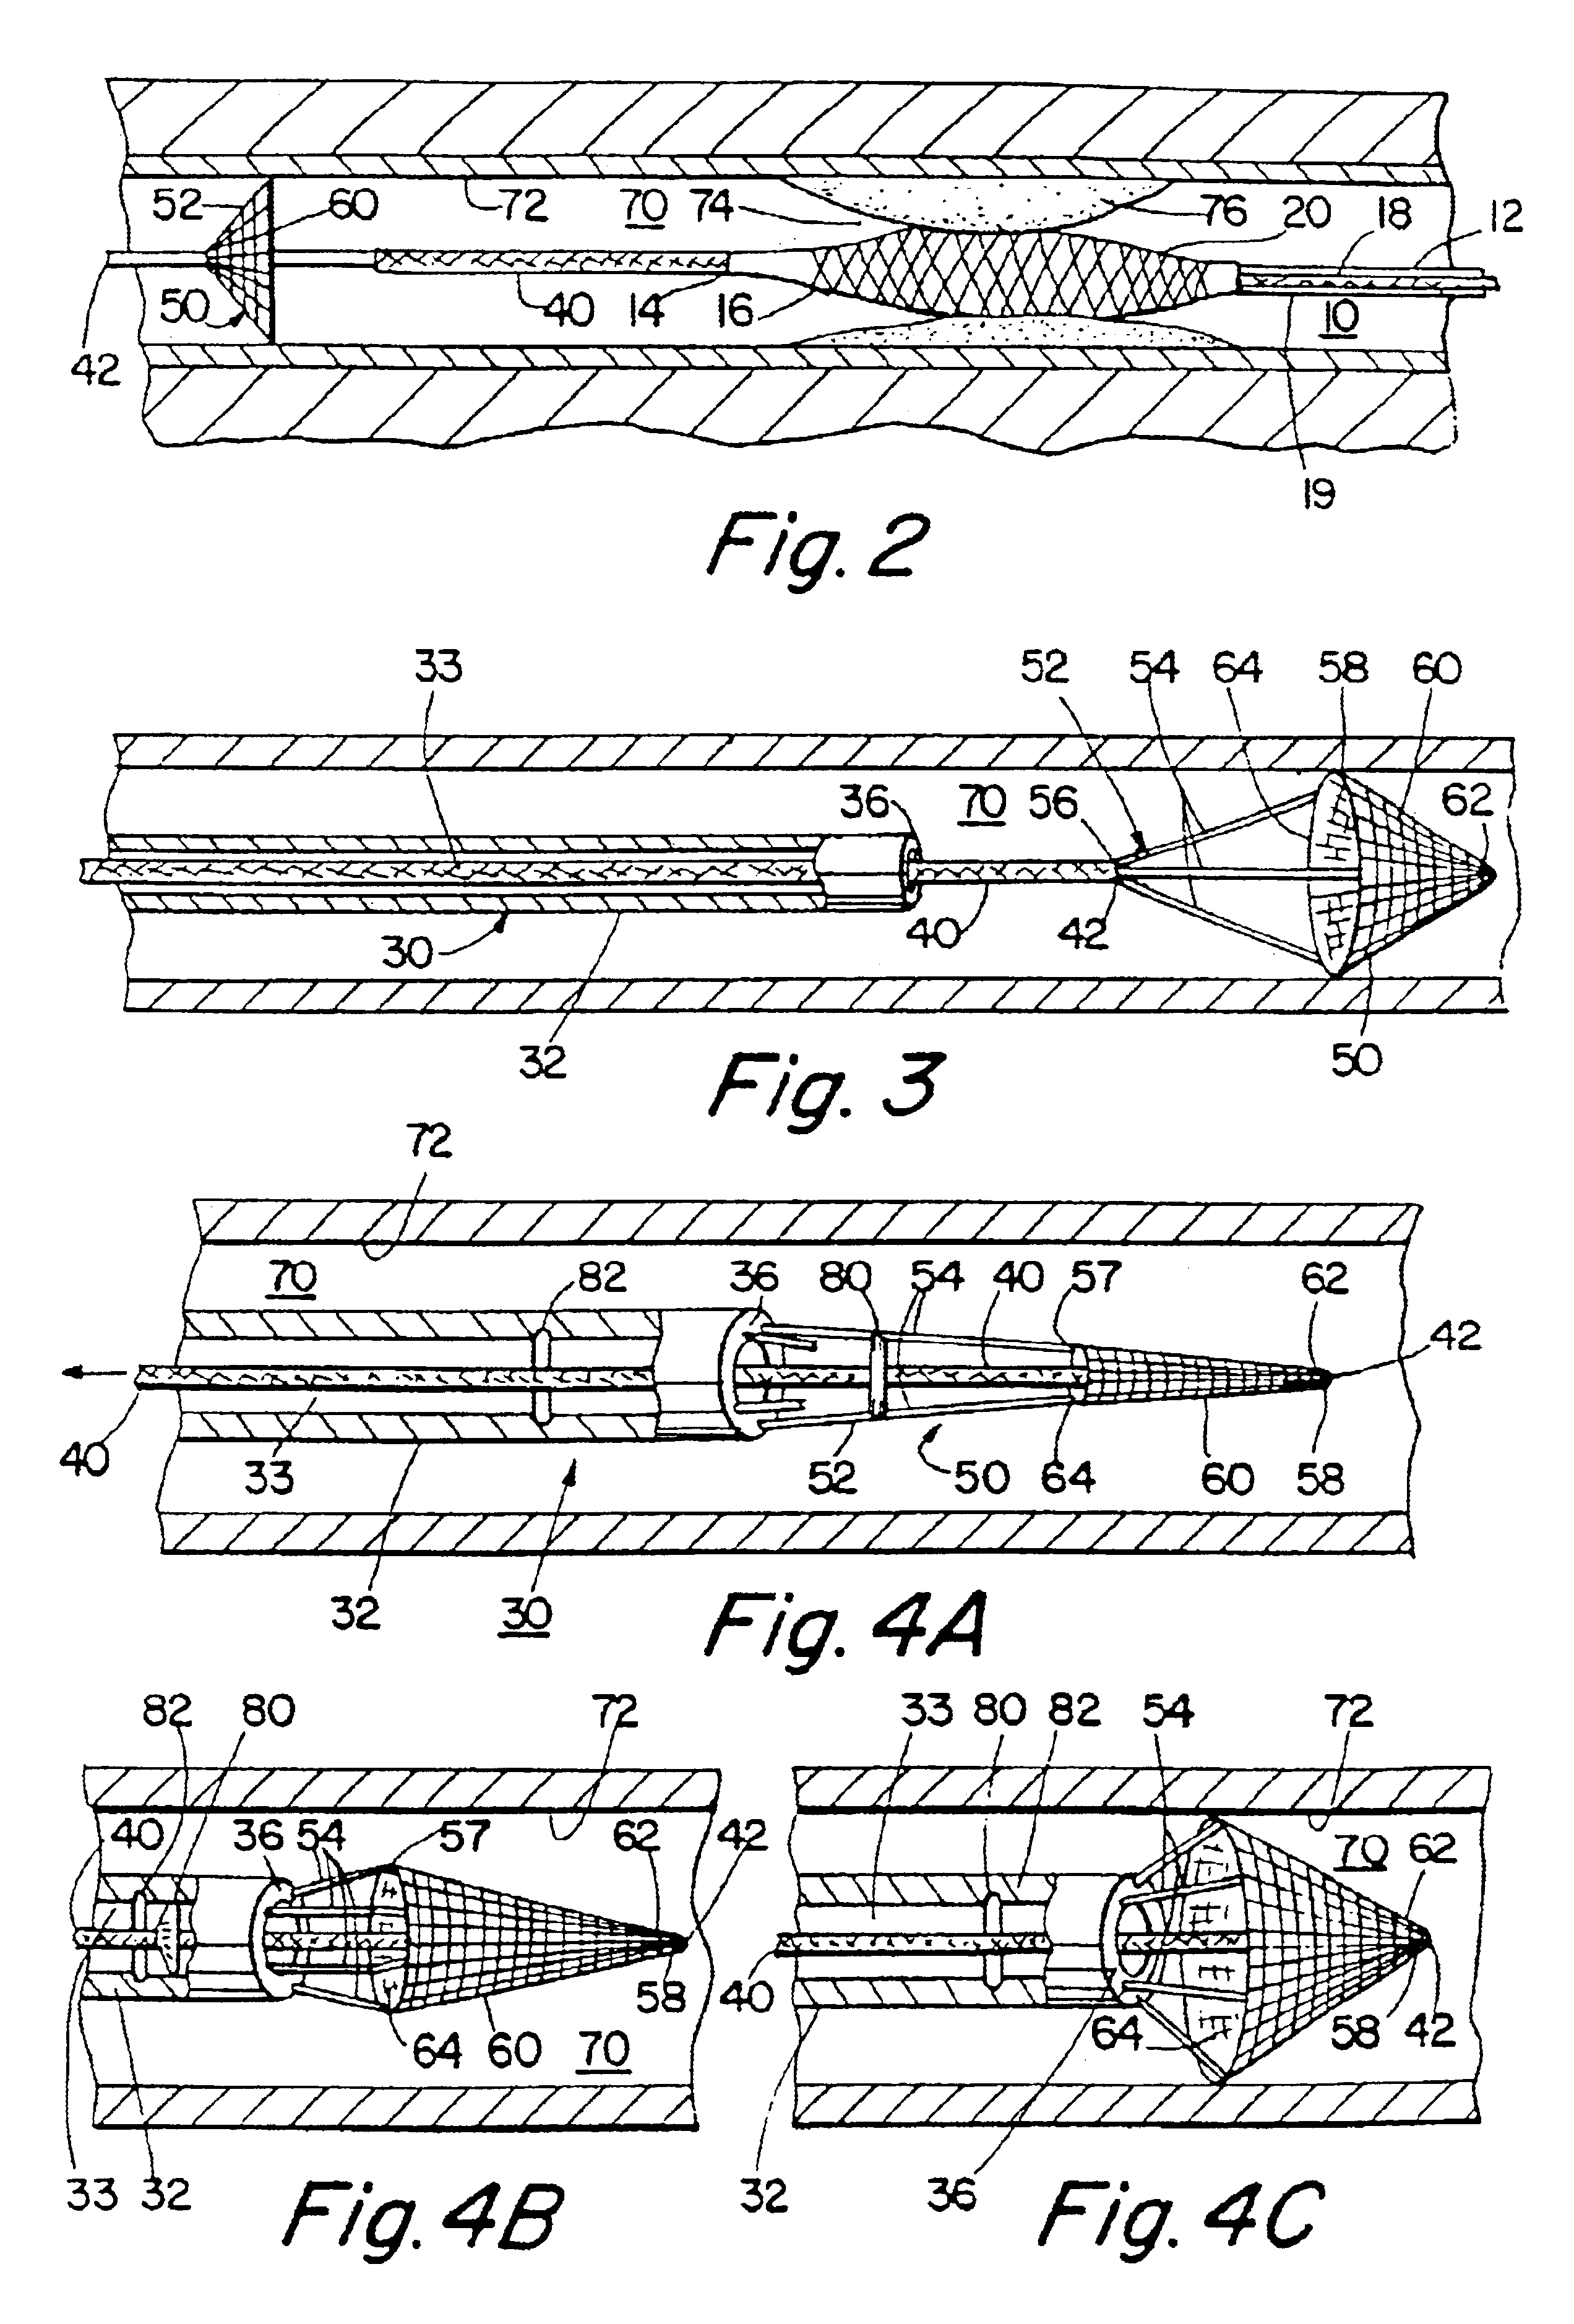 Percutaneous catheter and guidewire having filter and medical device deployment capabilities